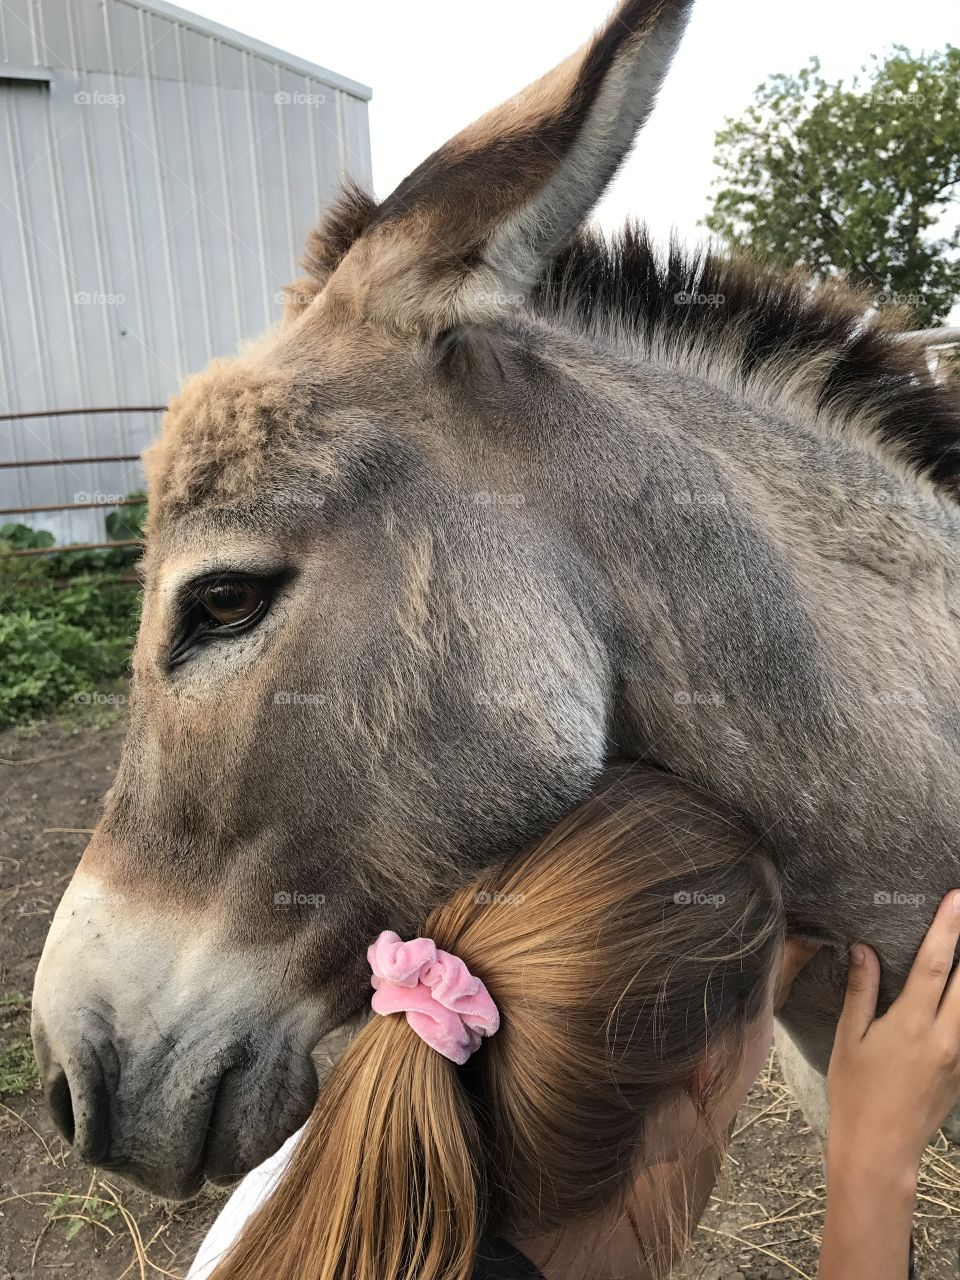 Donkey resting his head on girl